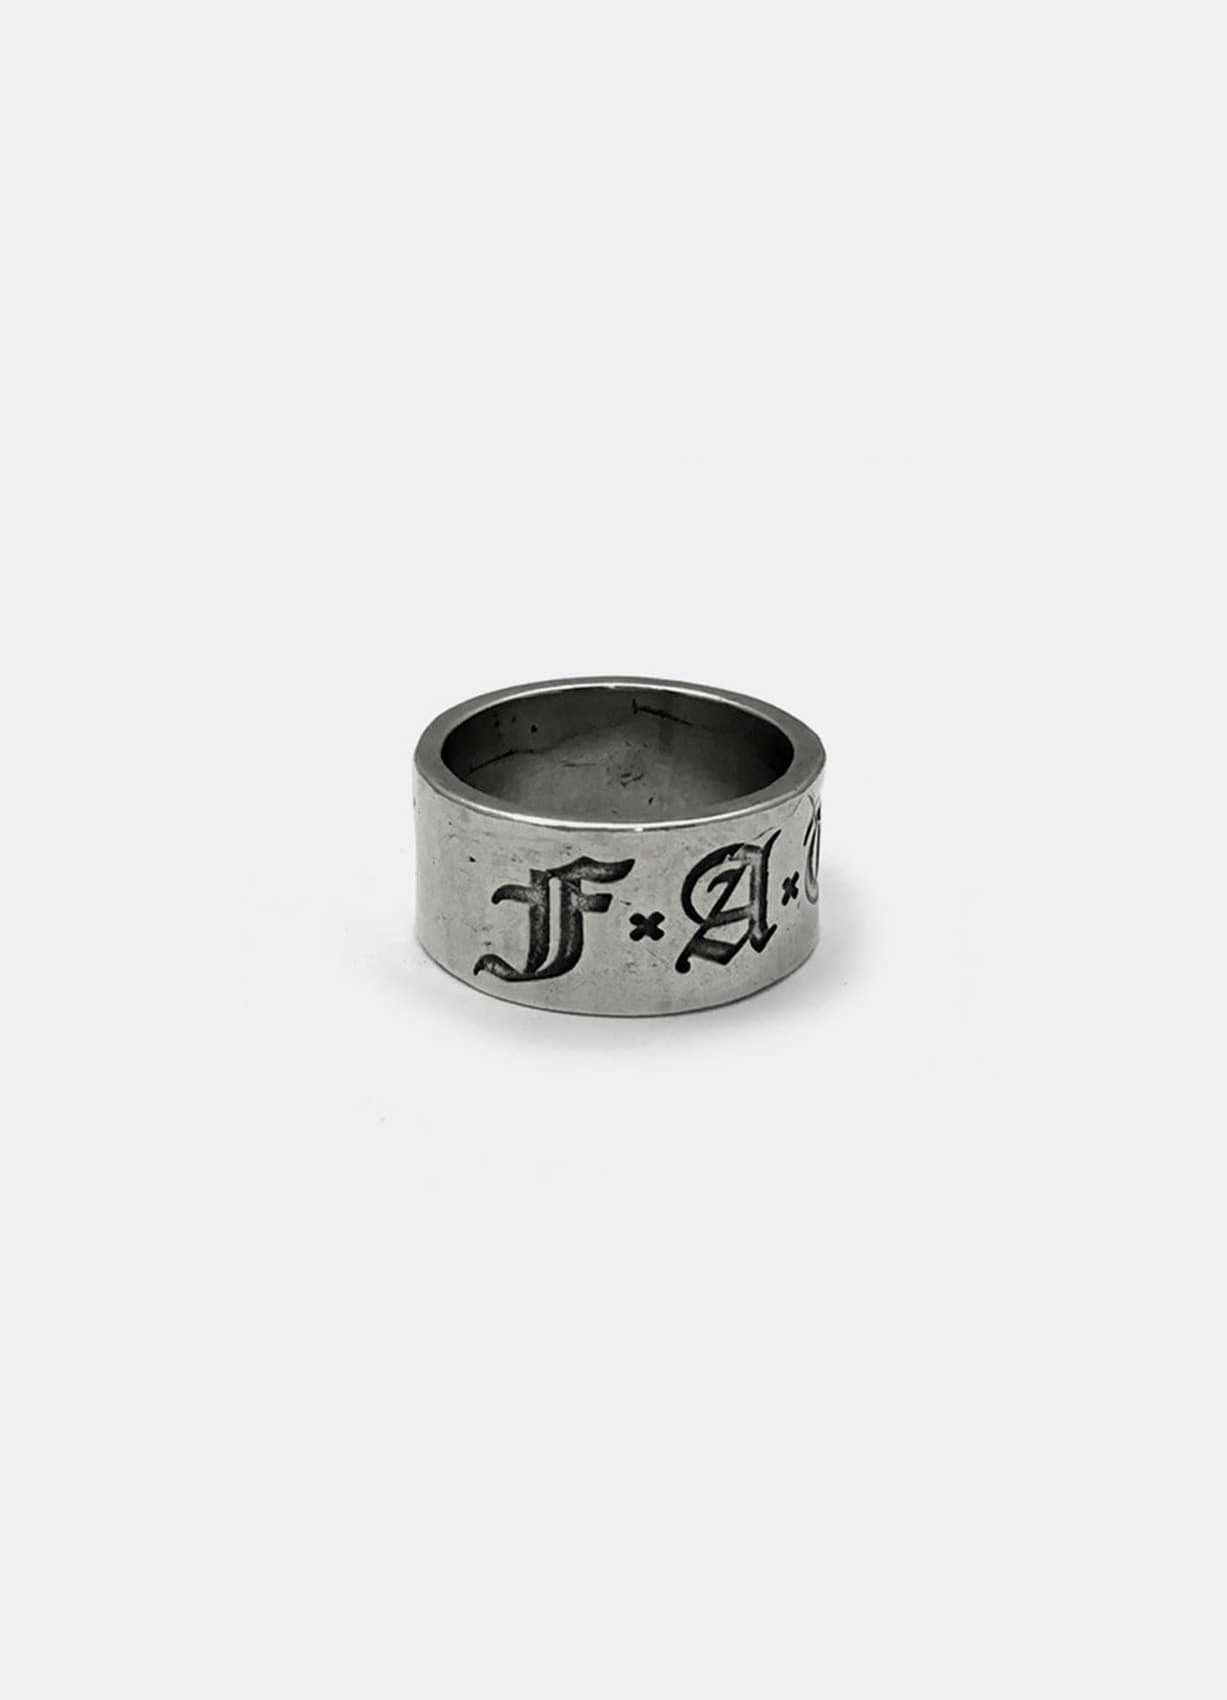 Fate Engraving Thick Spacer